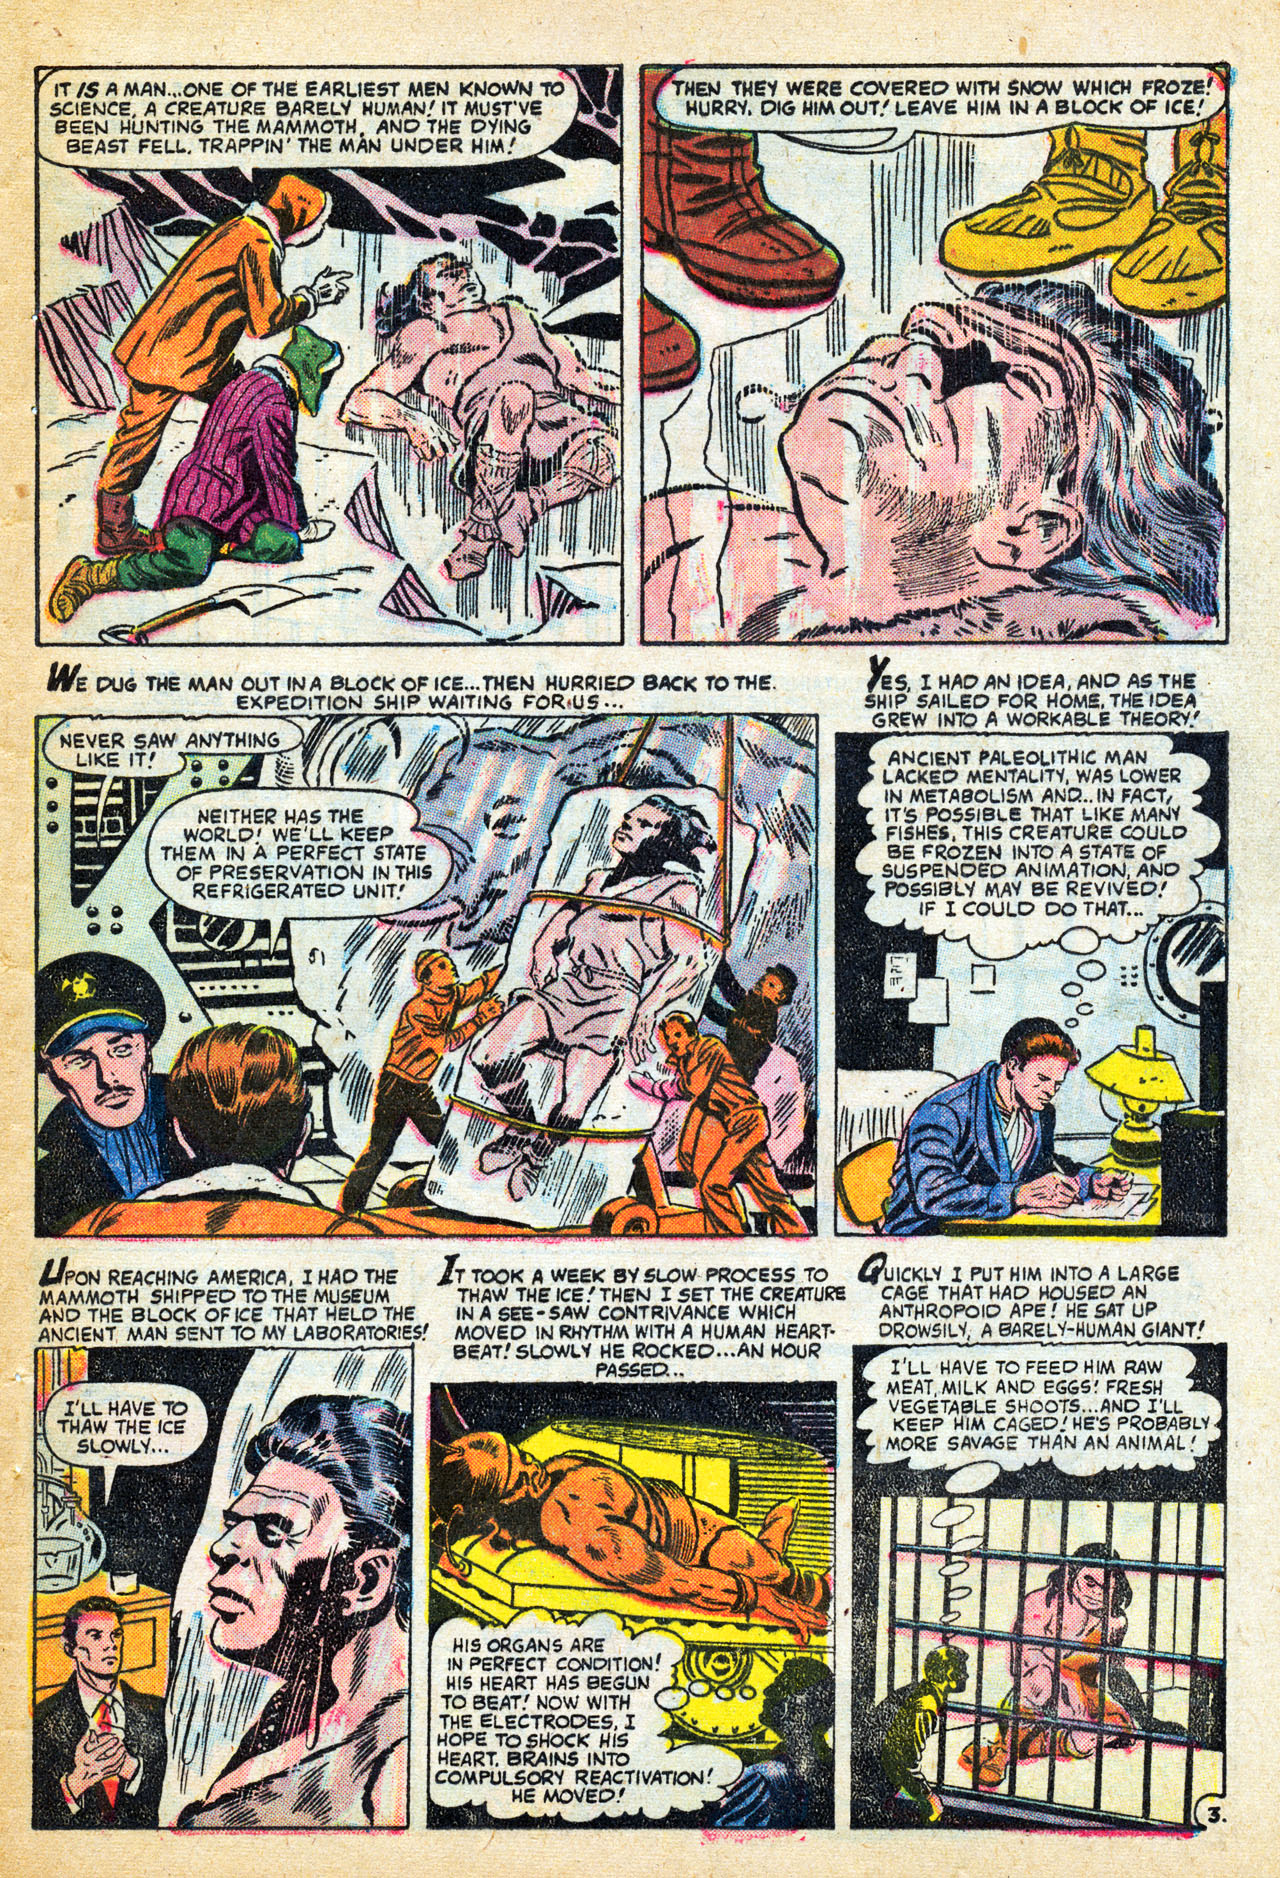 Marvel Tales (1949) 151 Page 4